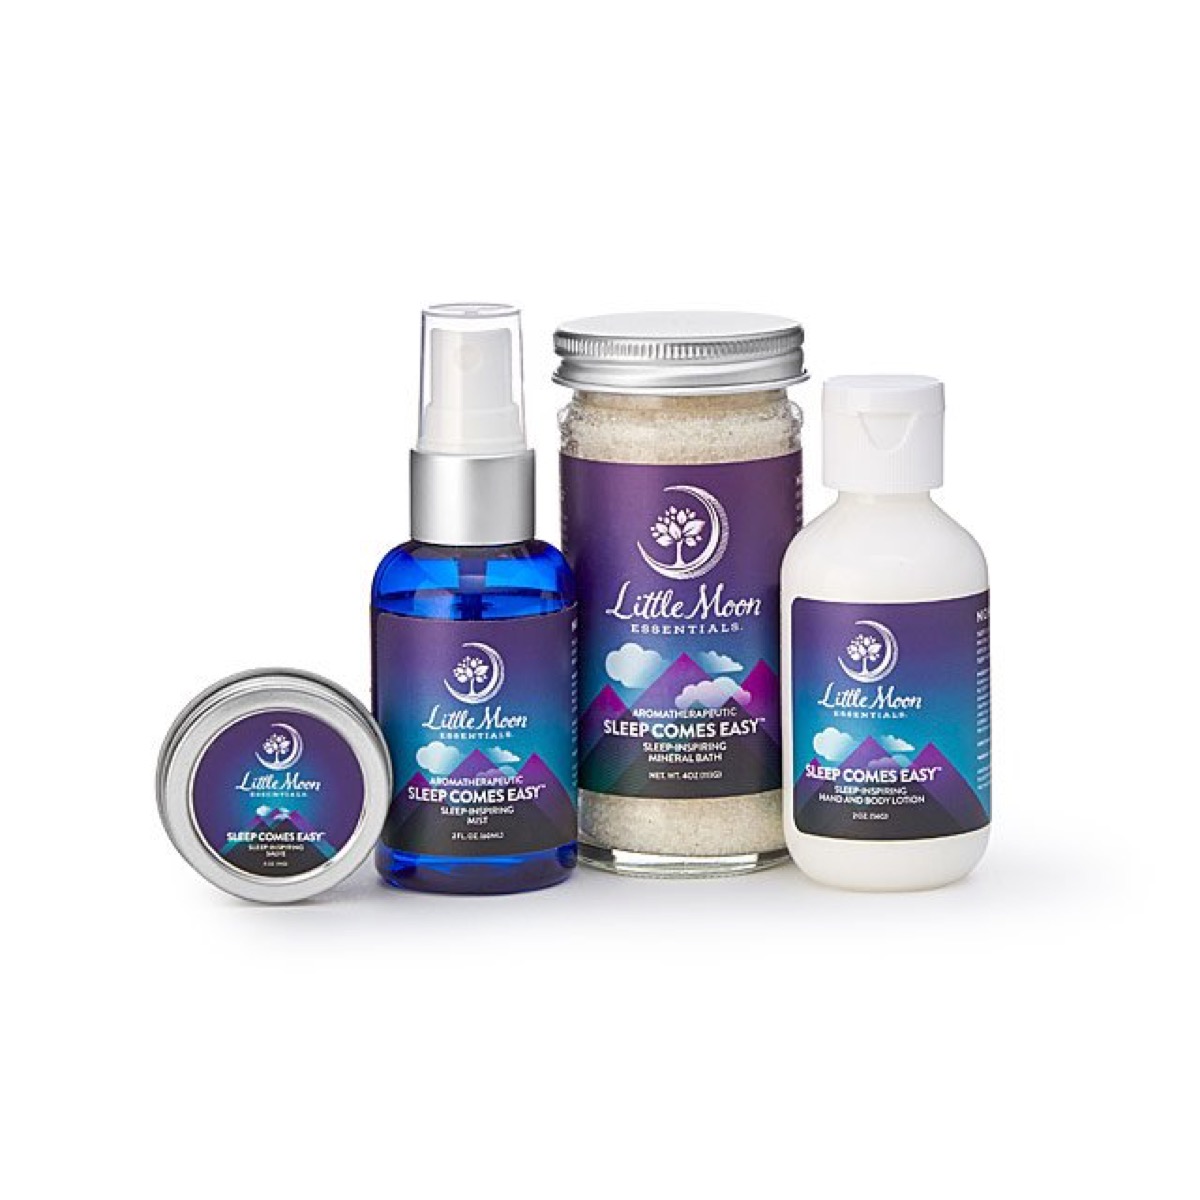 sleep comes easy set of products, relaxation gift